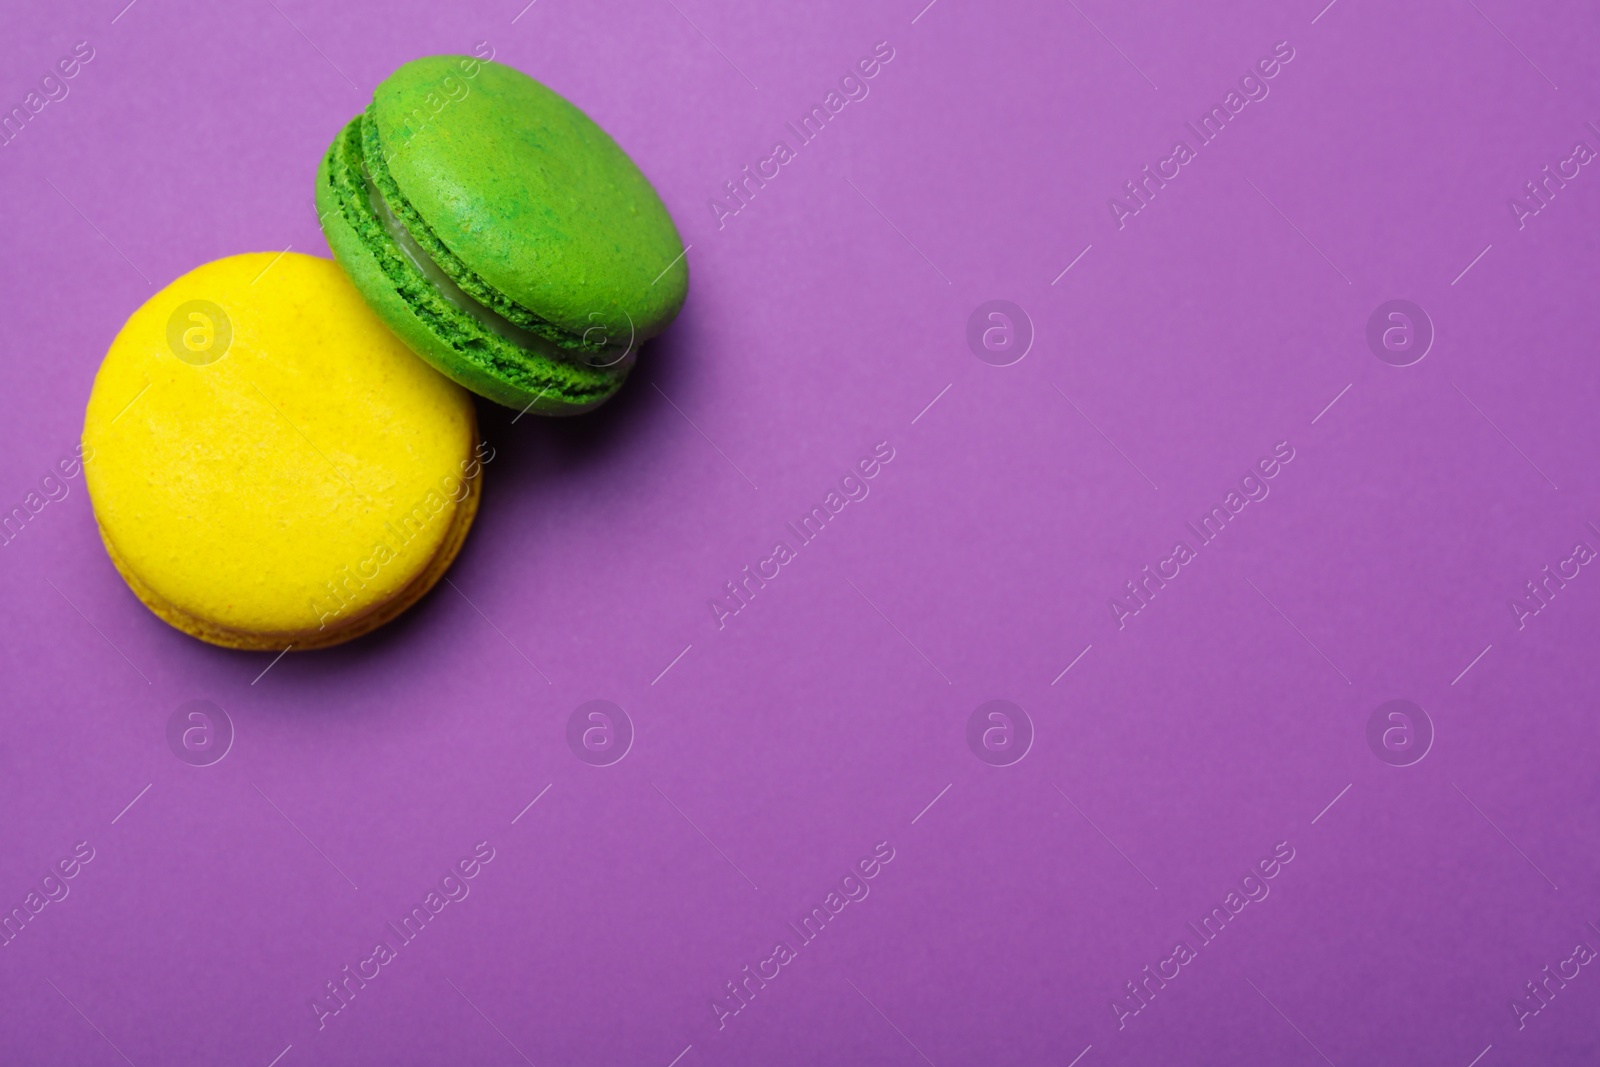 Photo of Delicious colorful macarons on purple background, flat lay. Space for text